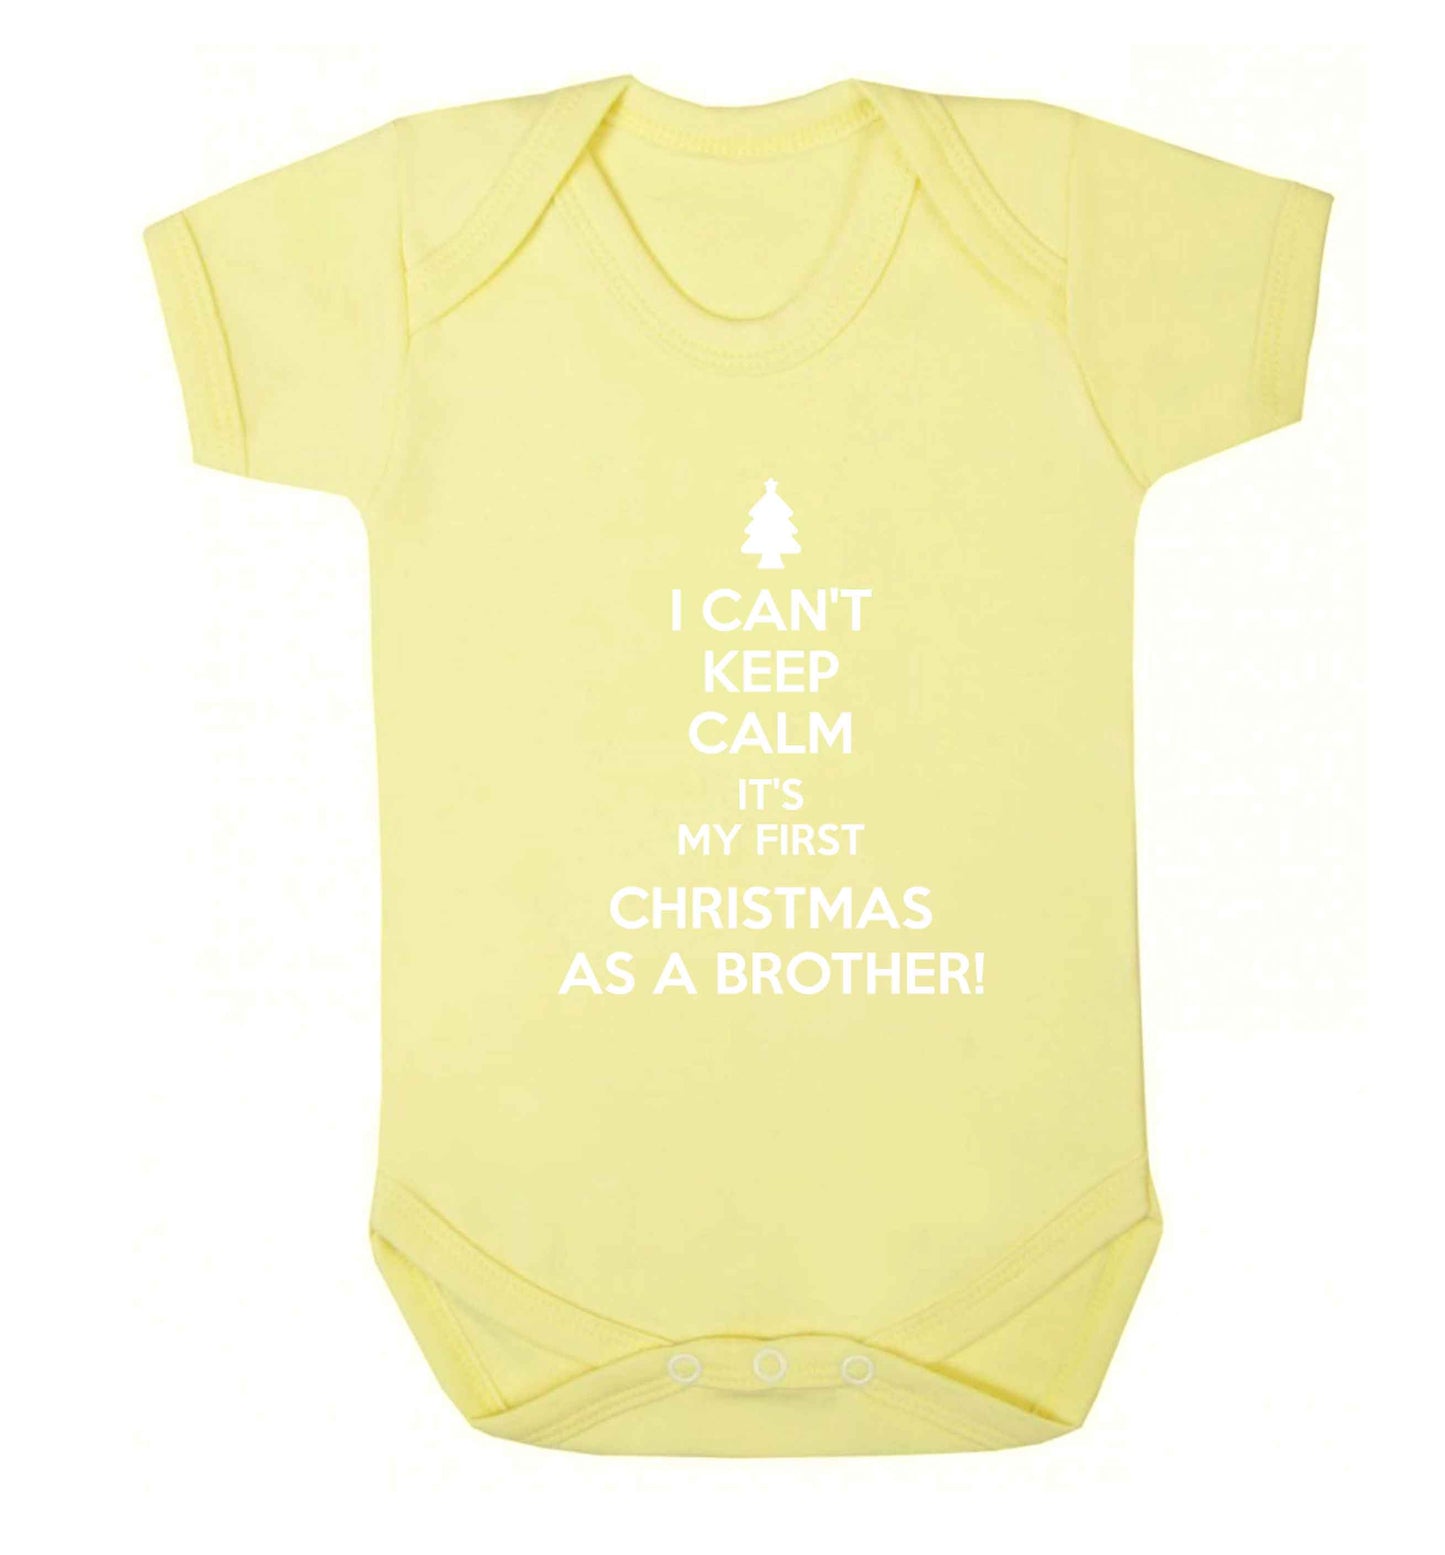 I can't keep calm it's my first Christmas as a brother! Baby Vest pale yellow 18-24 months